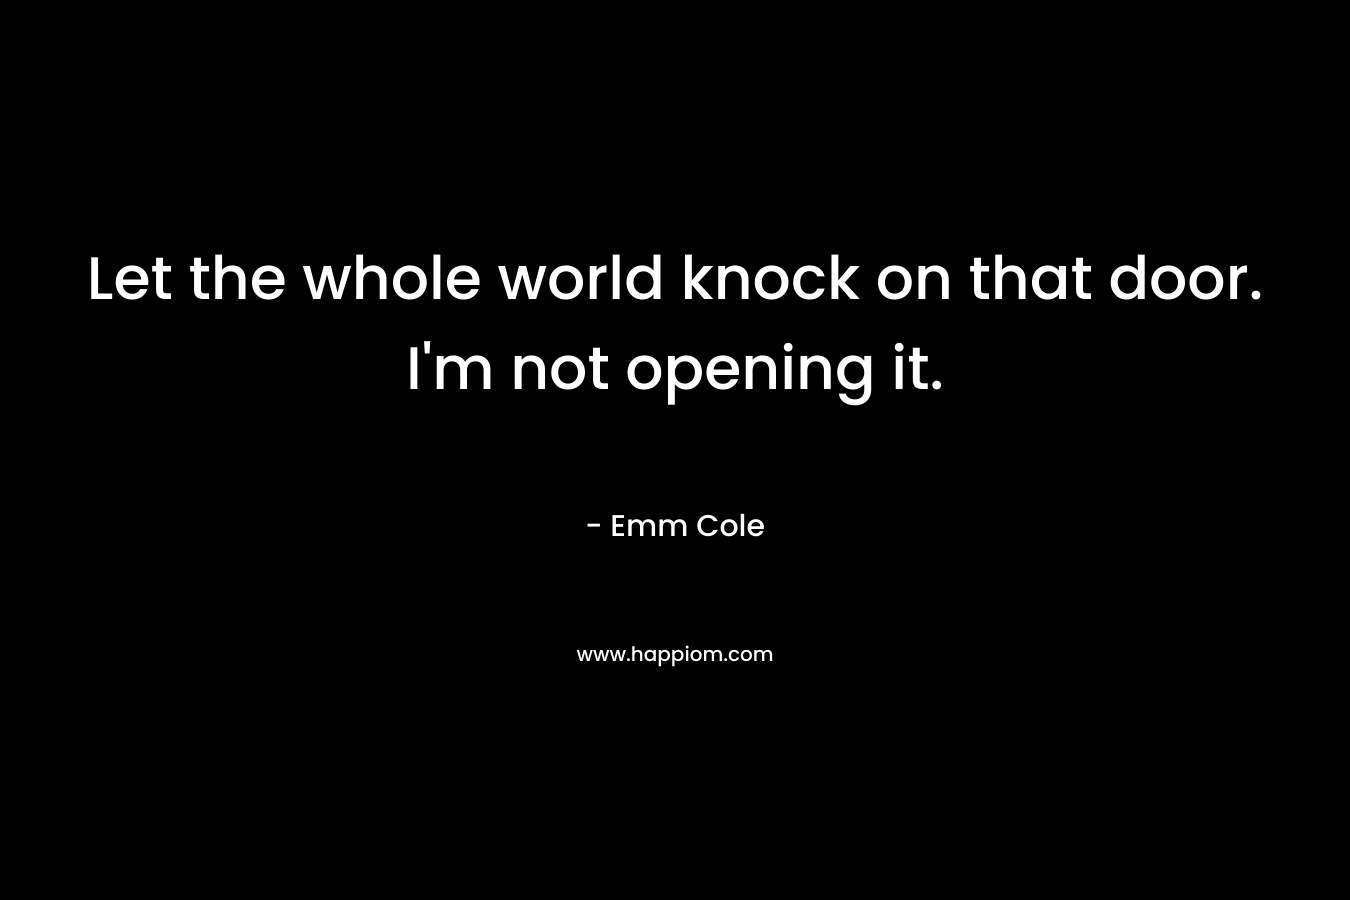 Let the whole world knock on that door. I'm not opening it.